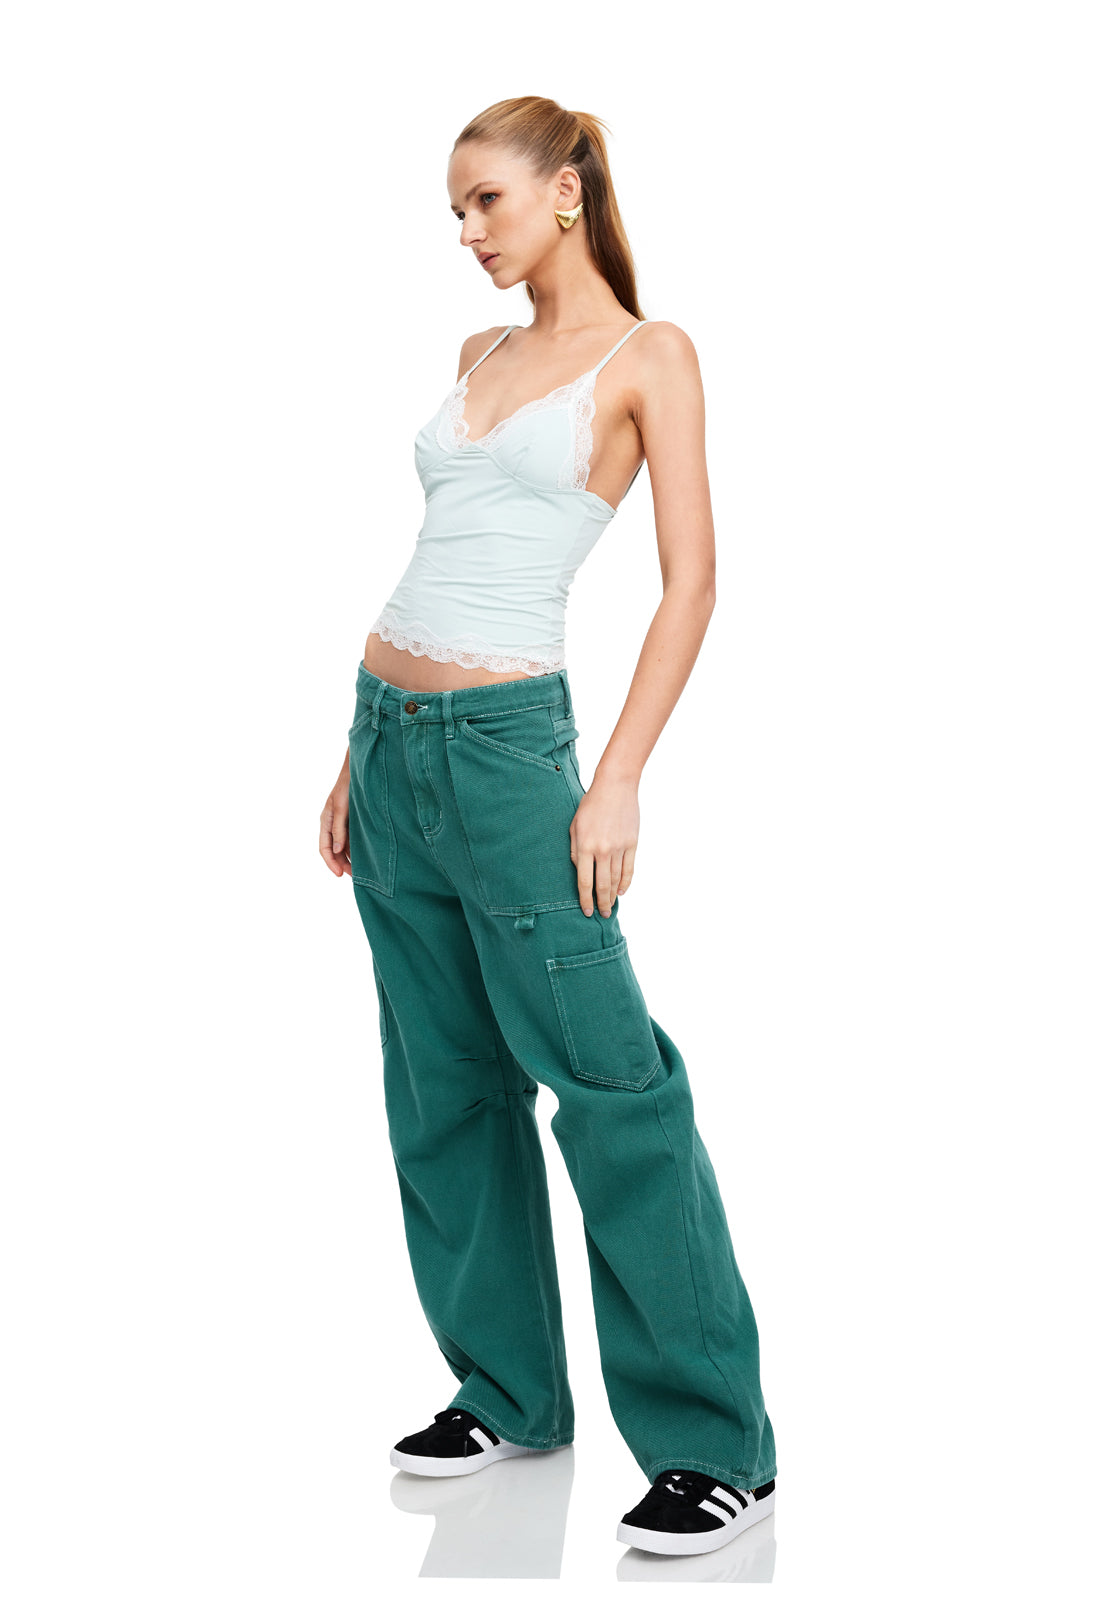 MIAMI VICE PANT - FOREST GREEN – L I O N E S S